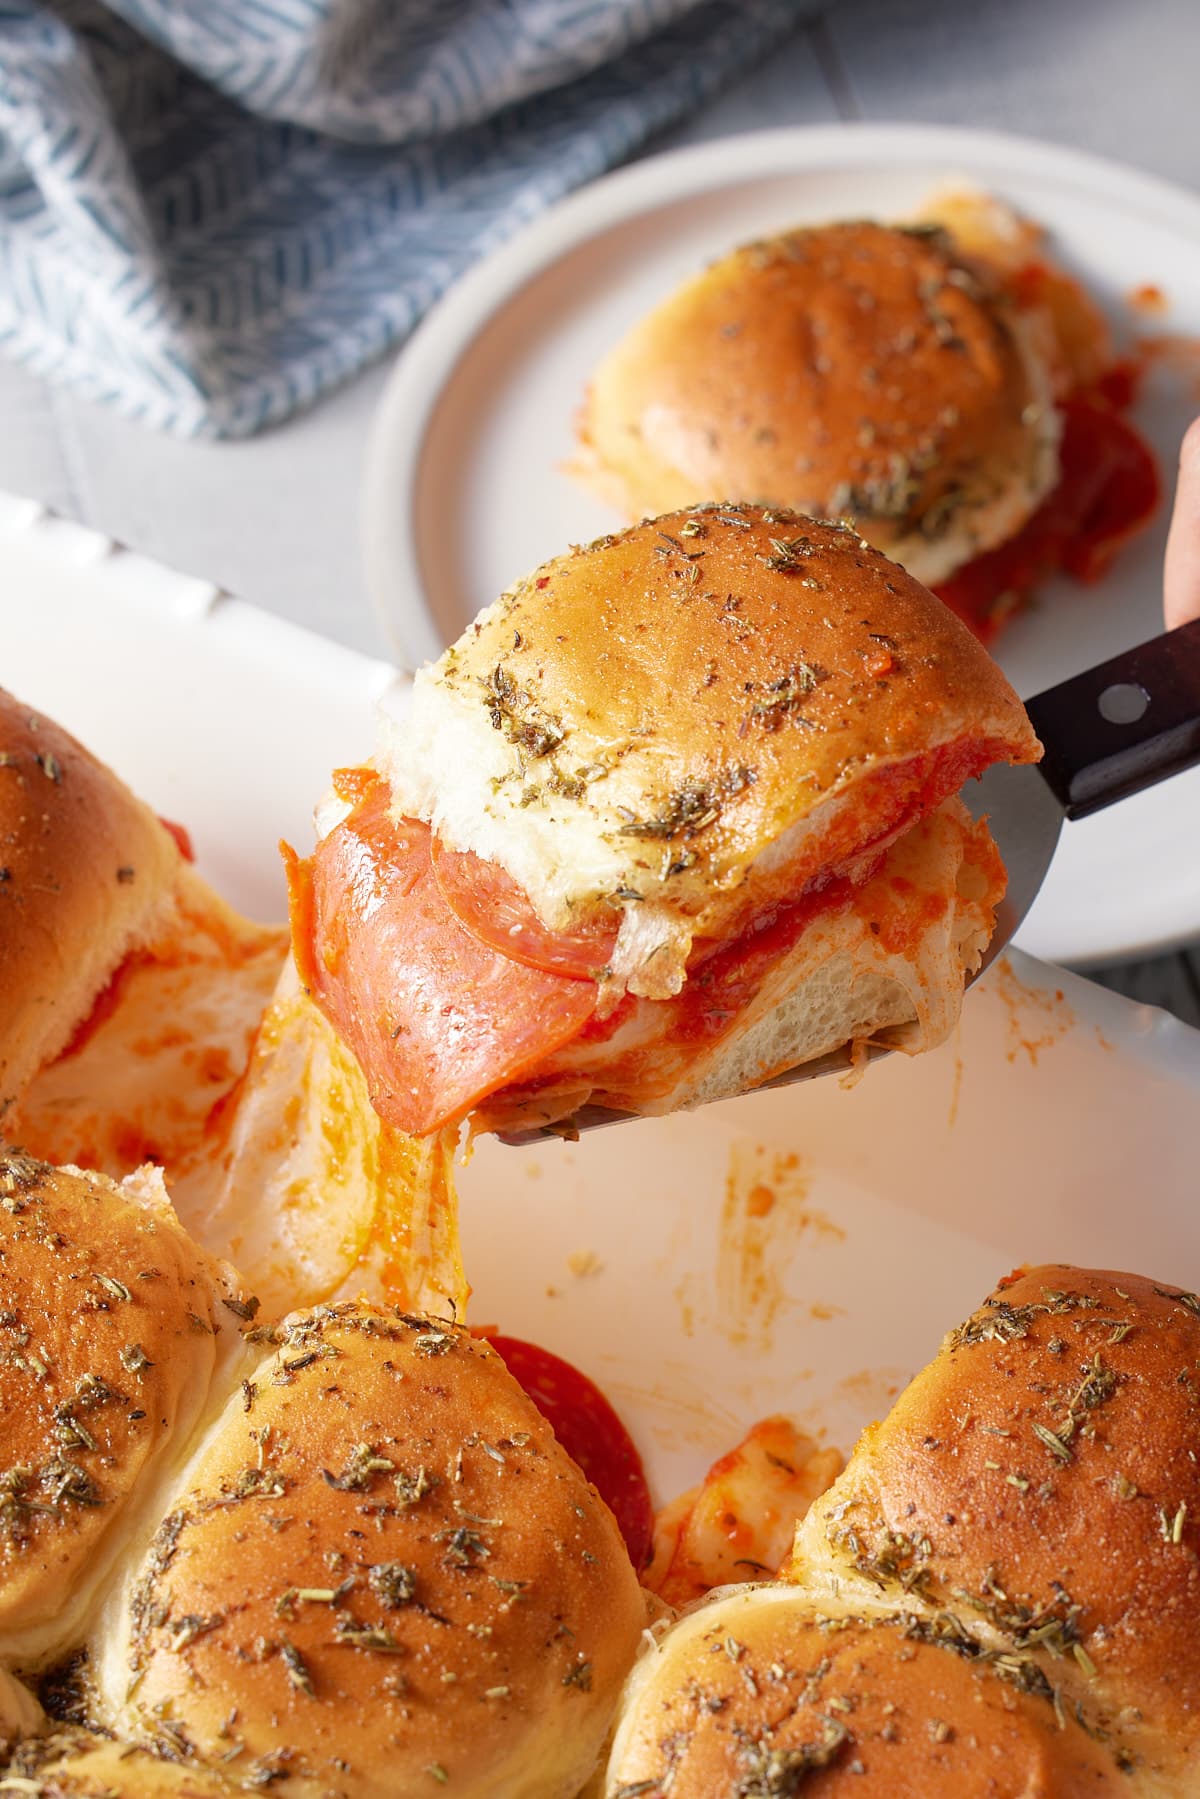 portion of pizza sliders on a palate knife